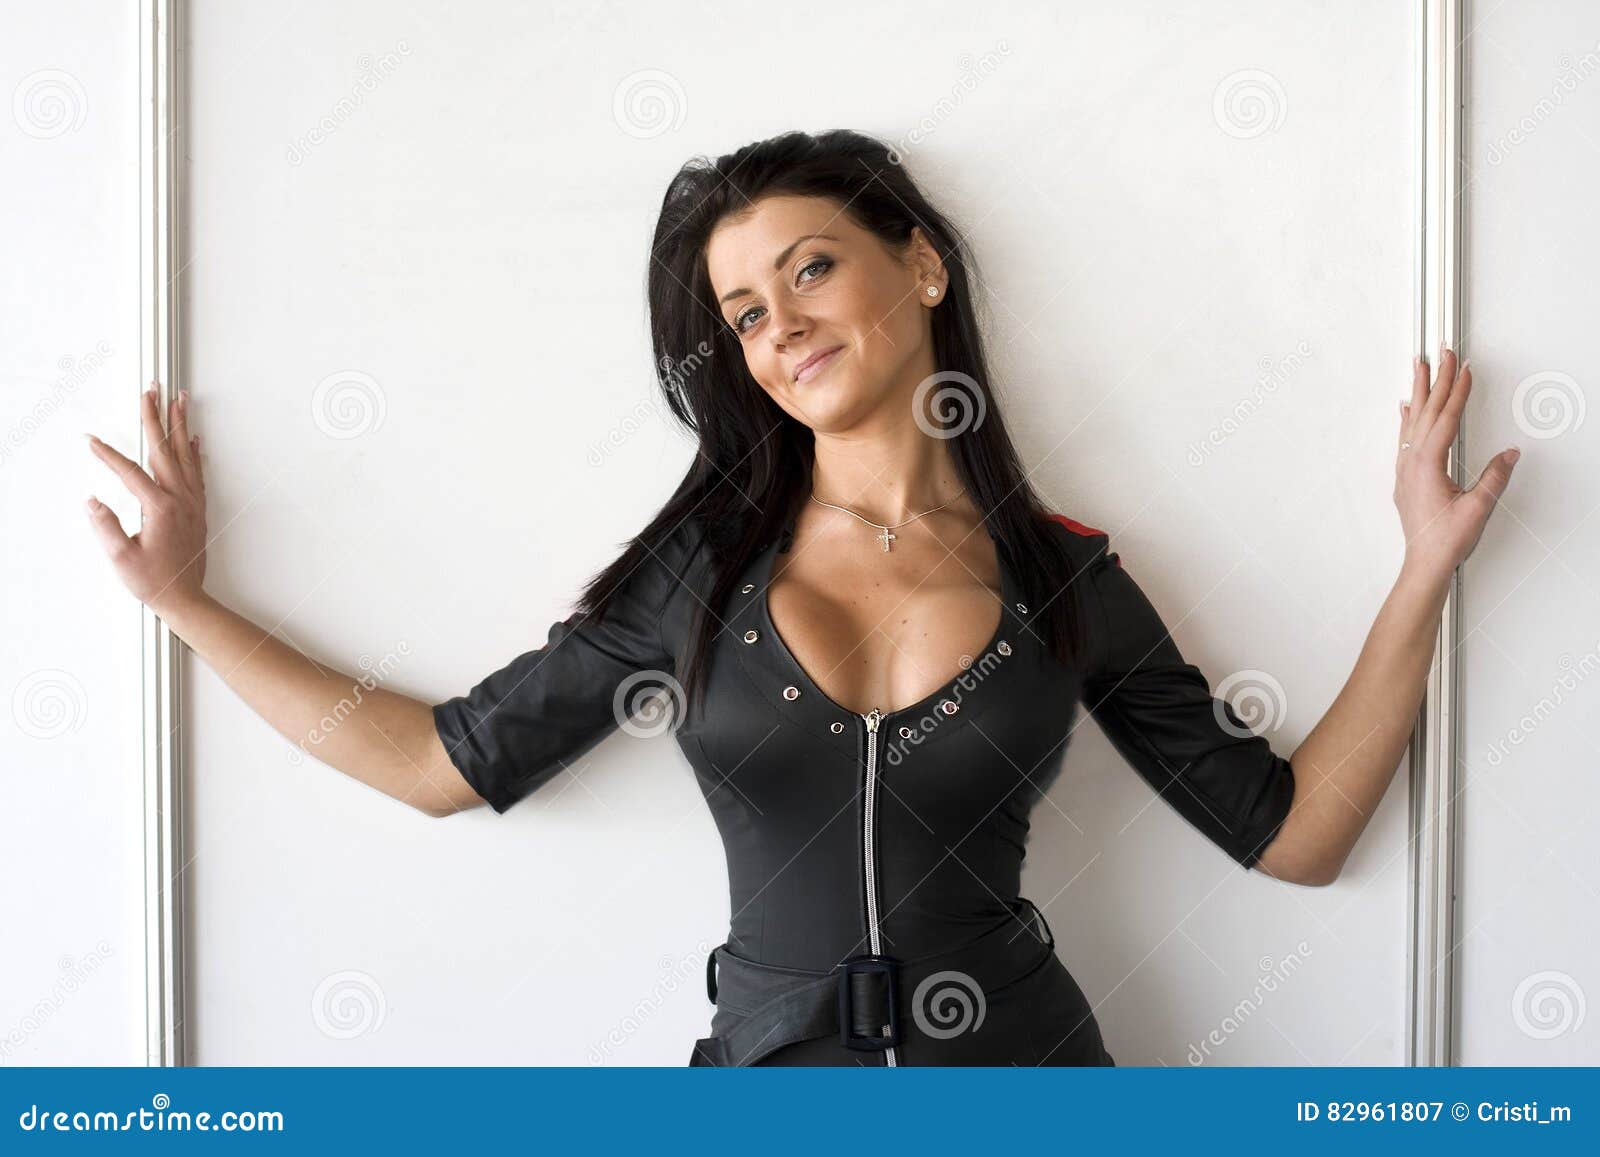 Young Attractive Woman with Big Round Boobs Wearing a Racing